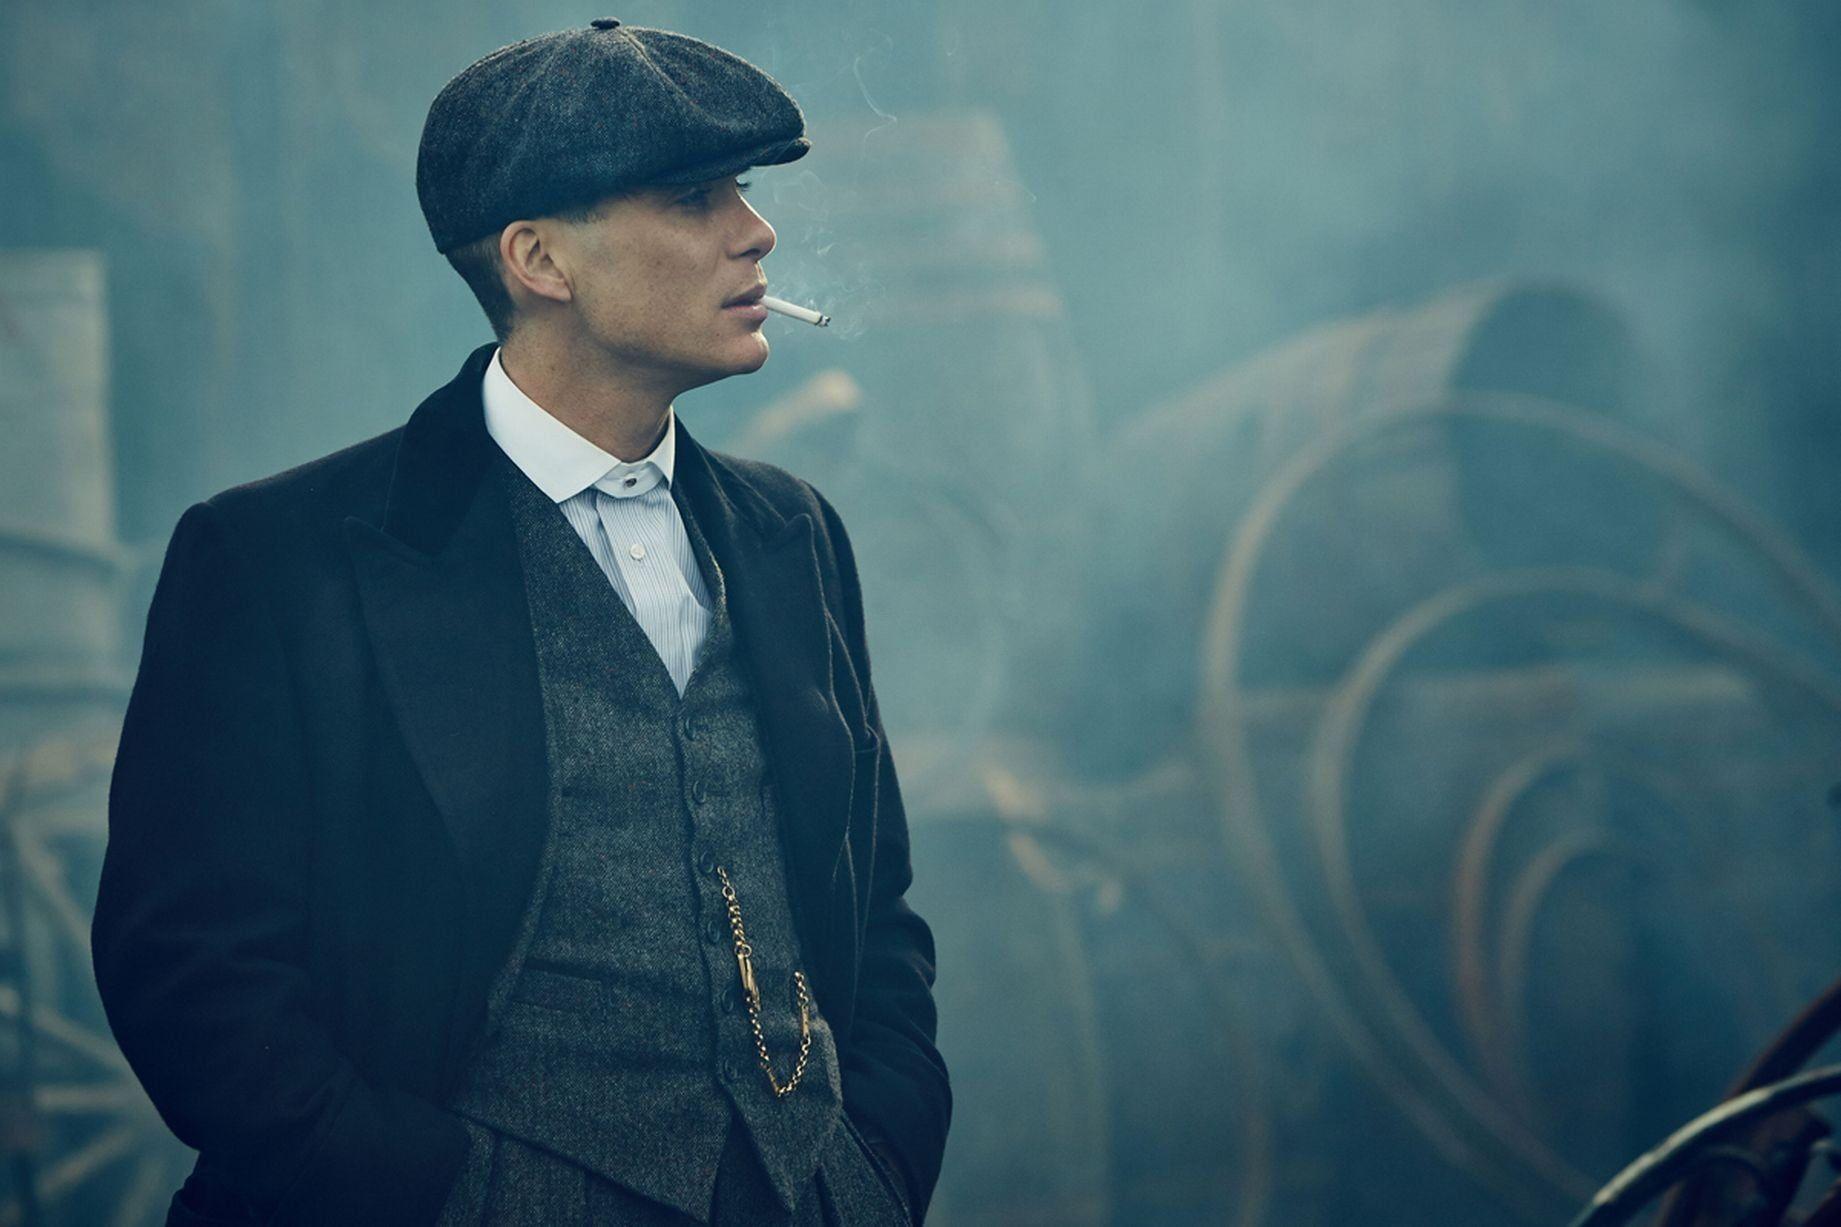 Wallpaper ID 295547  TV Show Peaky Blinders Phone Wallpaper Cillian  Murphy Thomas Shelby 2160x3840 free download